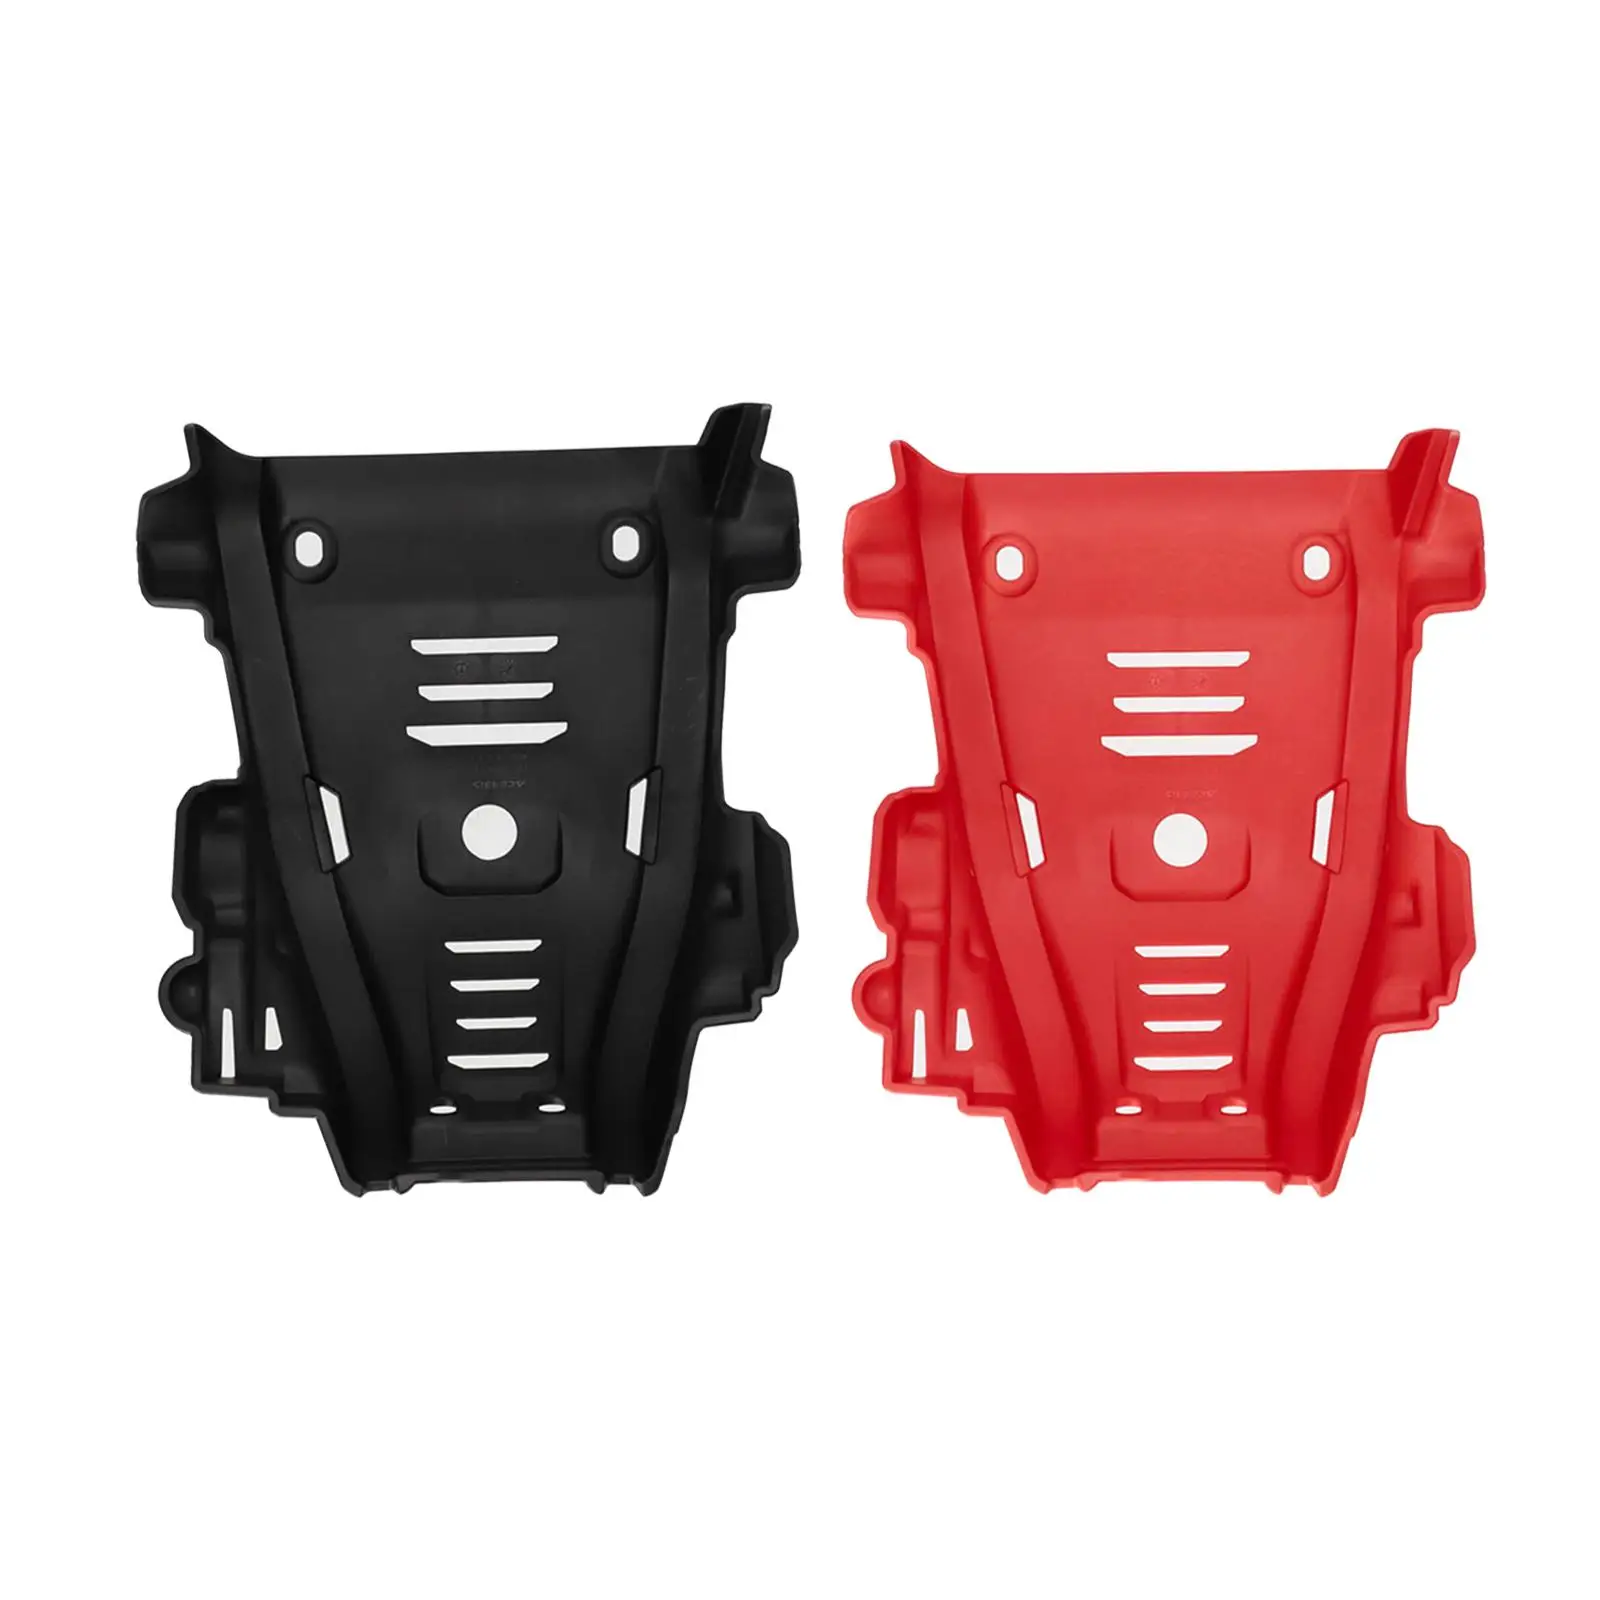 Engine Base Chassis Guard Plate Protector Cover for Crf300L Professional Durable